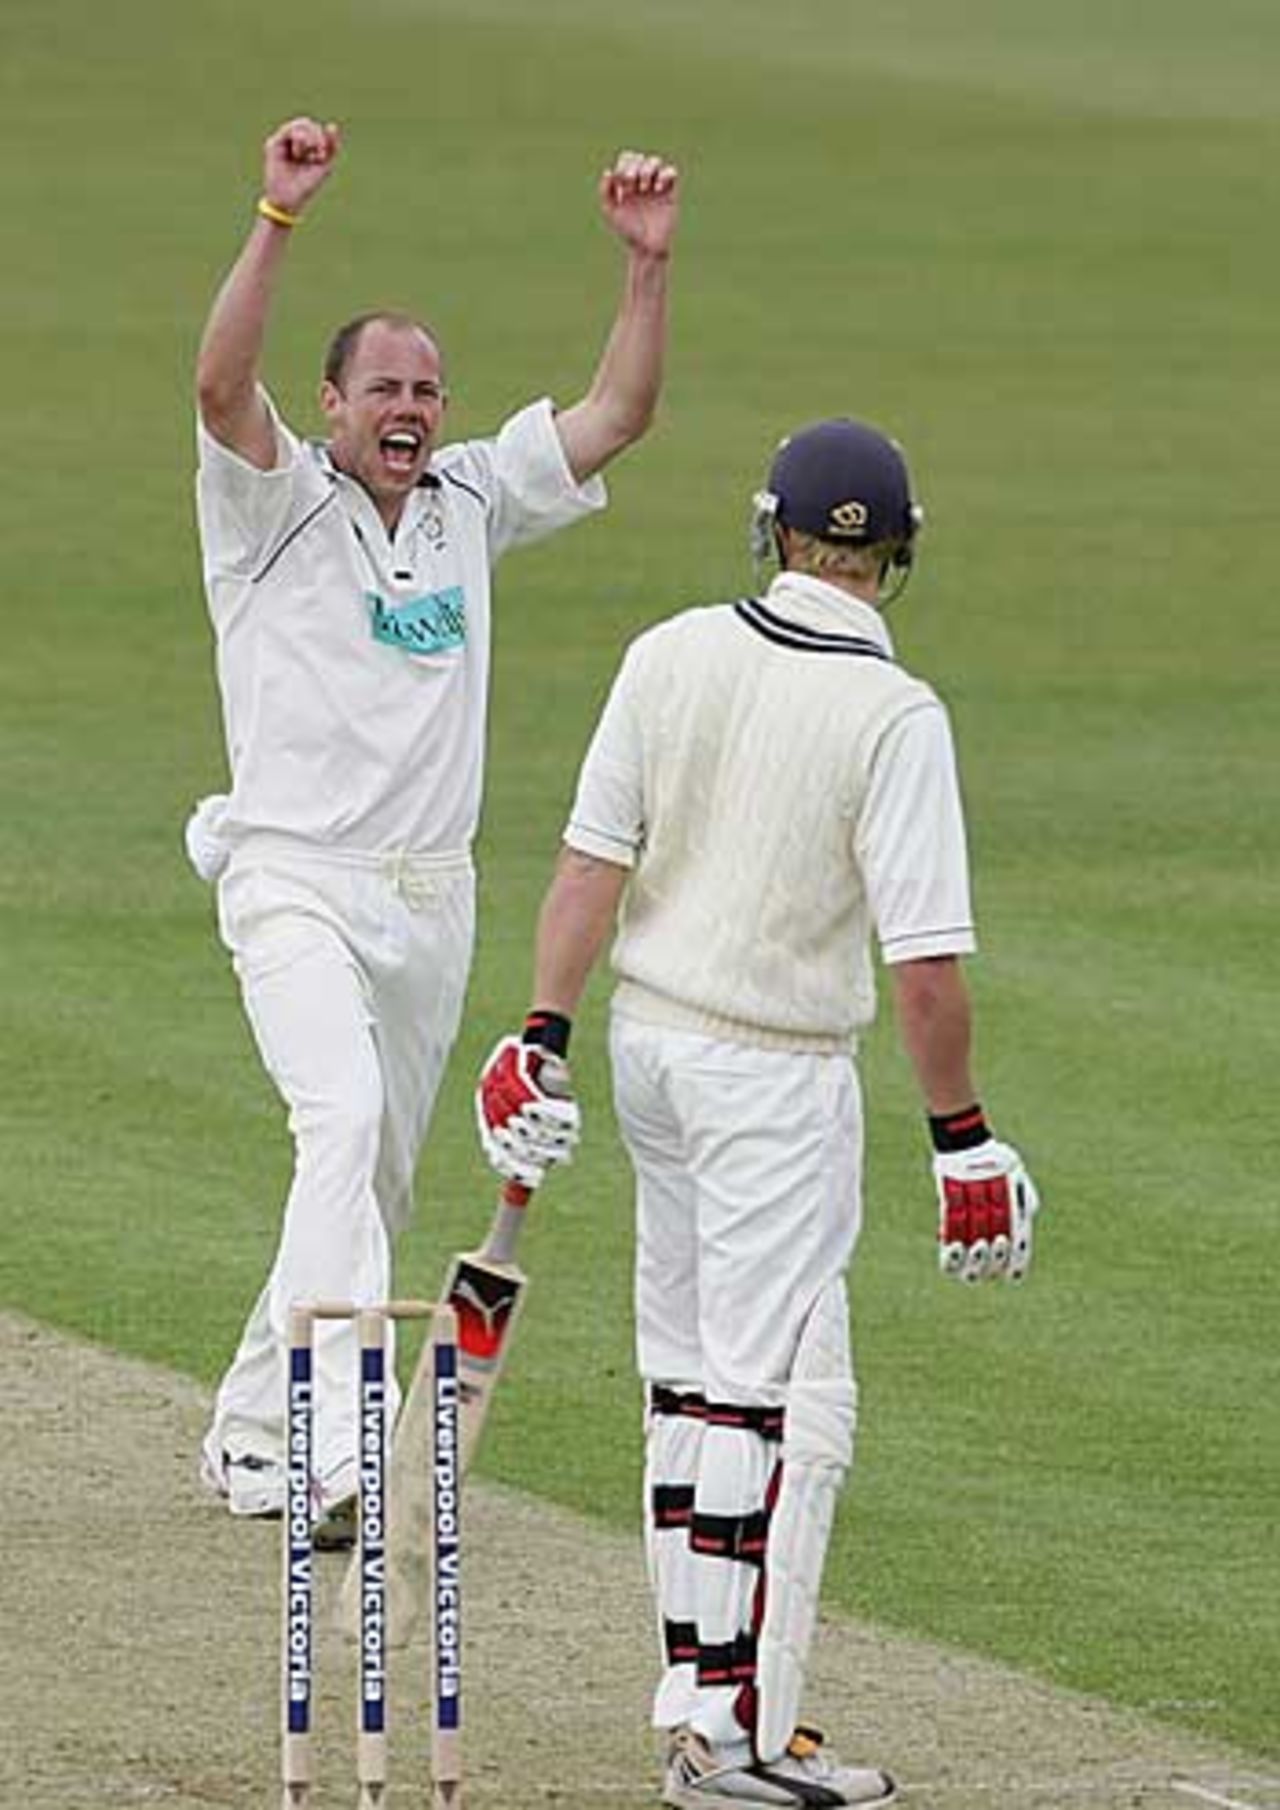 Billy Taylor celebrates the wicket of Nick Compton, Hampshire v Middlesex, Southampton, May 3, 2006